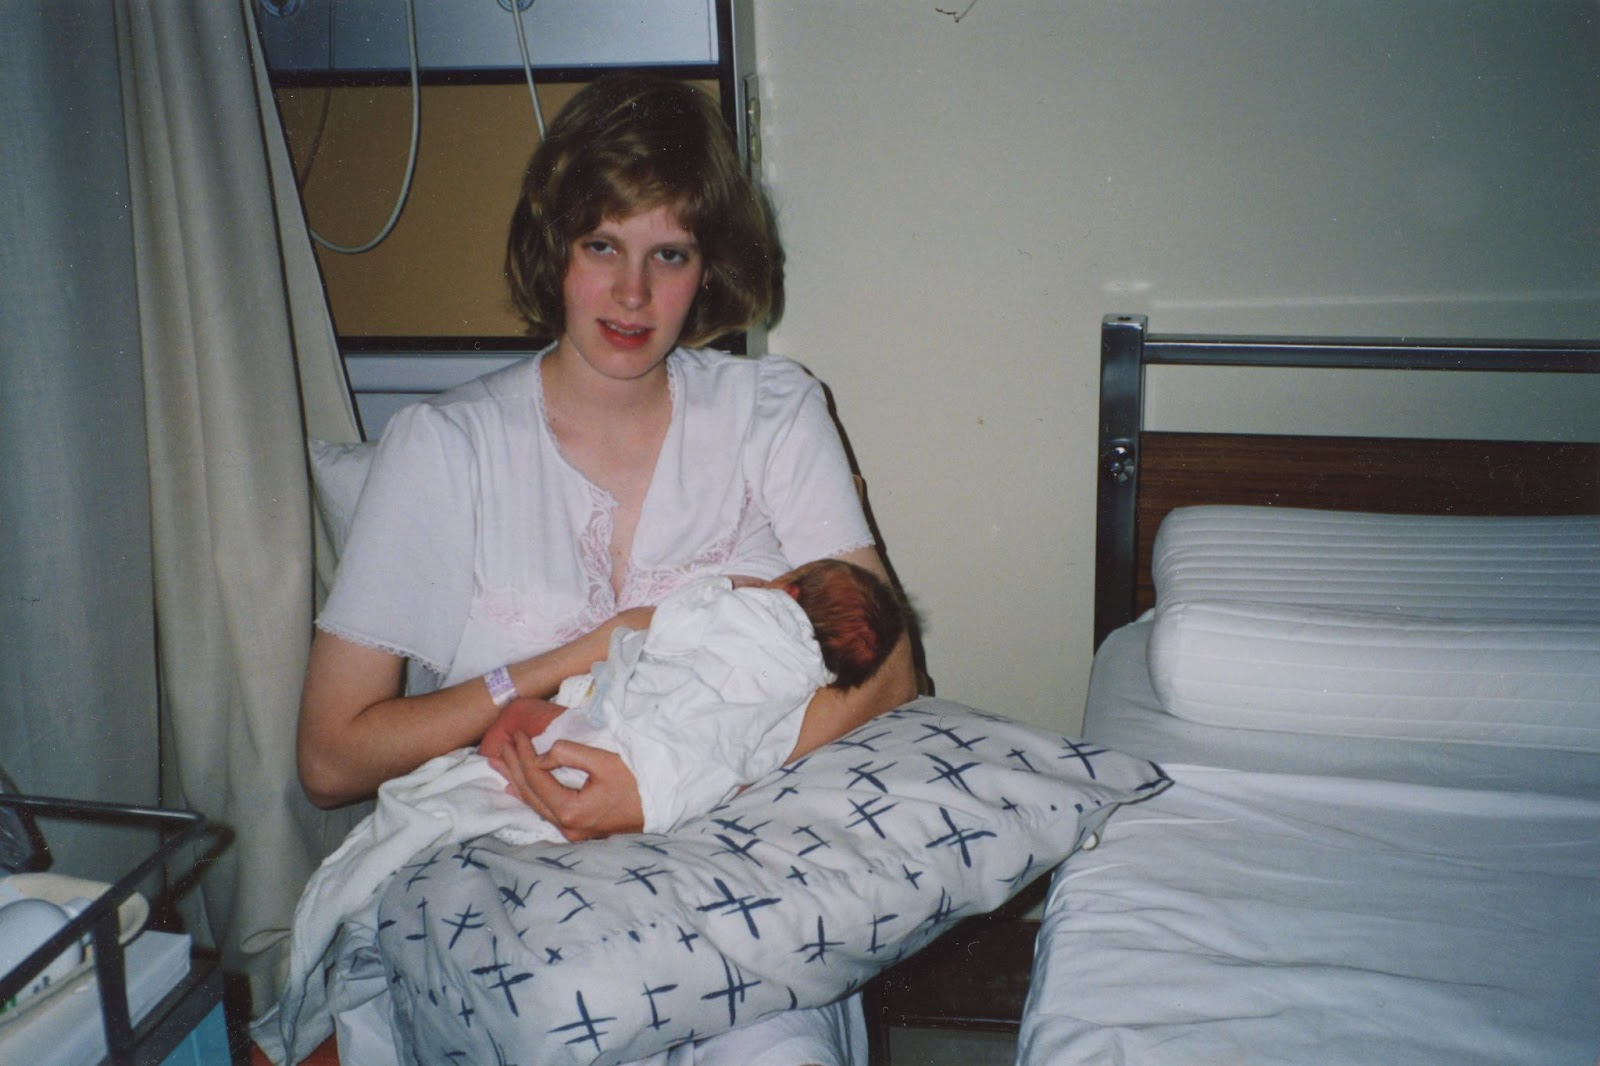 A photo of a young white woman holding a newborn baby up to her breast. She’s in a hospital room and looks slightly out of it.